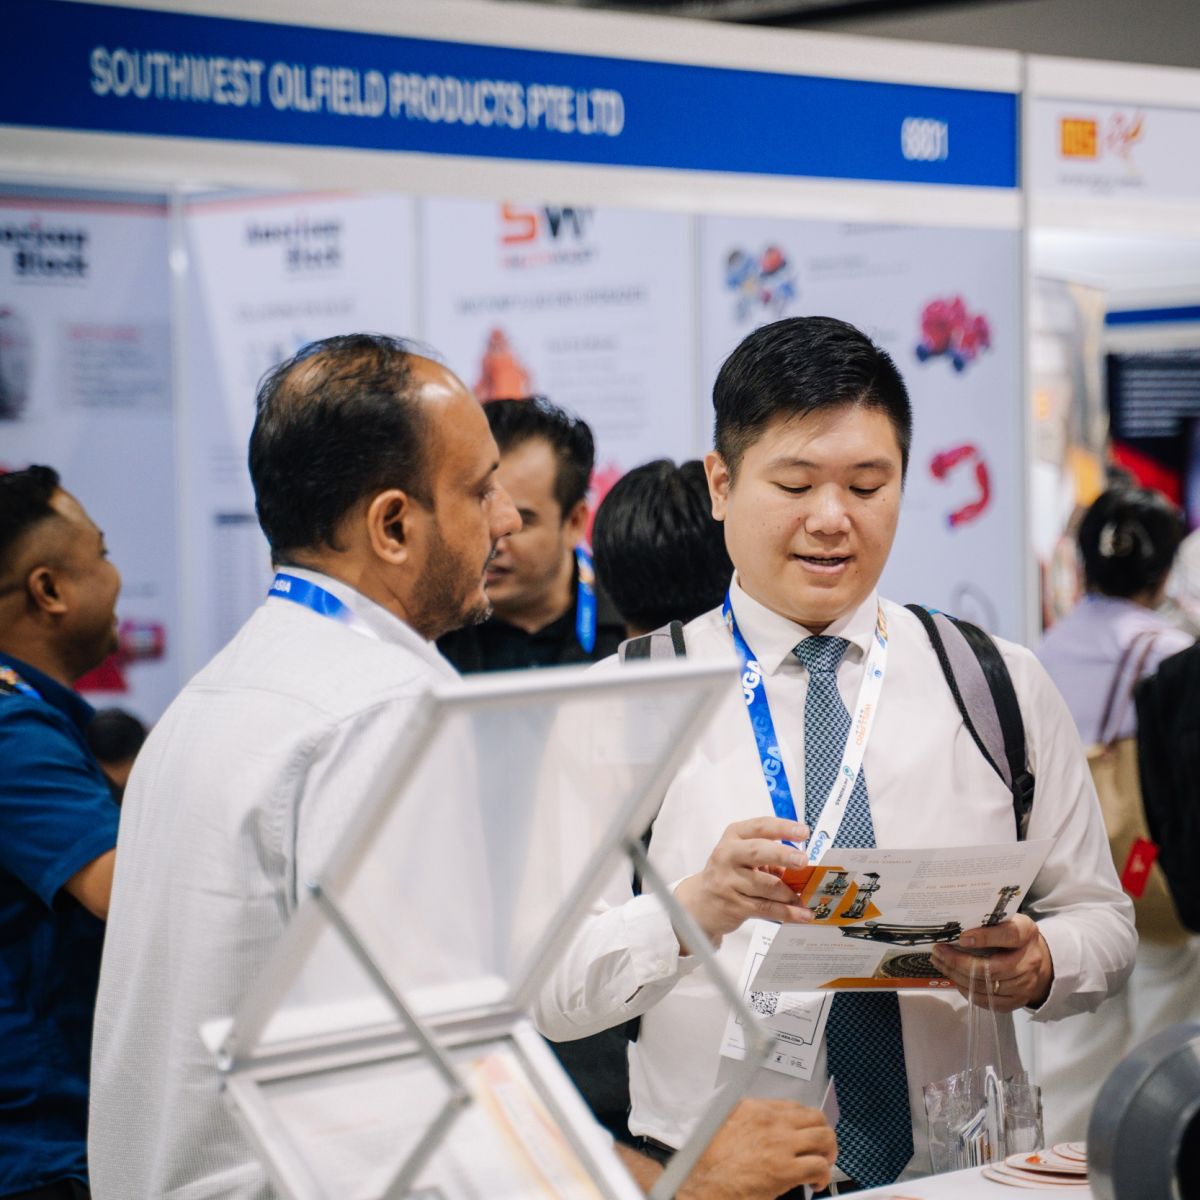 OGA MALAYSIA 2023 DB PROGETTI Events and fairs Technical support to major companies operating in the industrial, petrochemical, and oil & gas sectors in Siziano